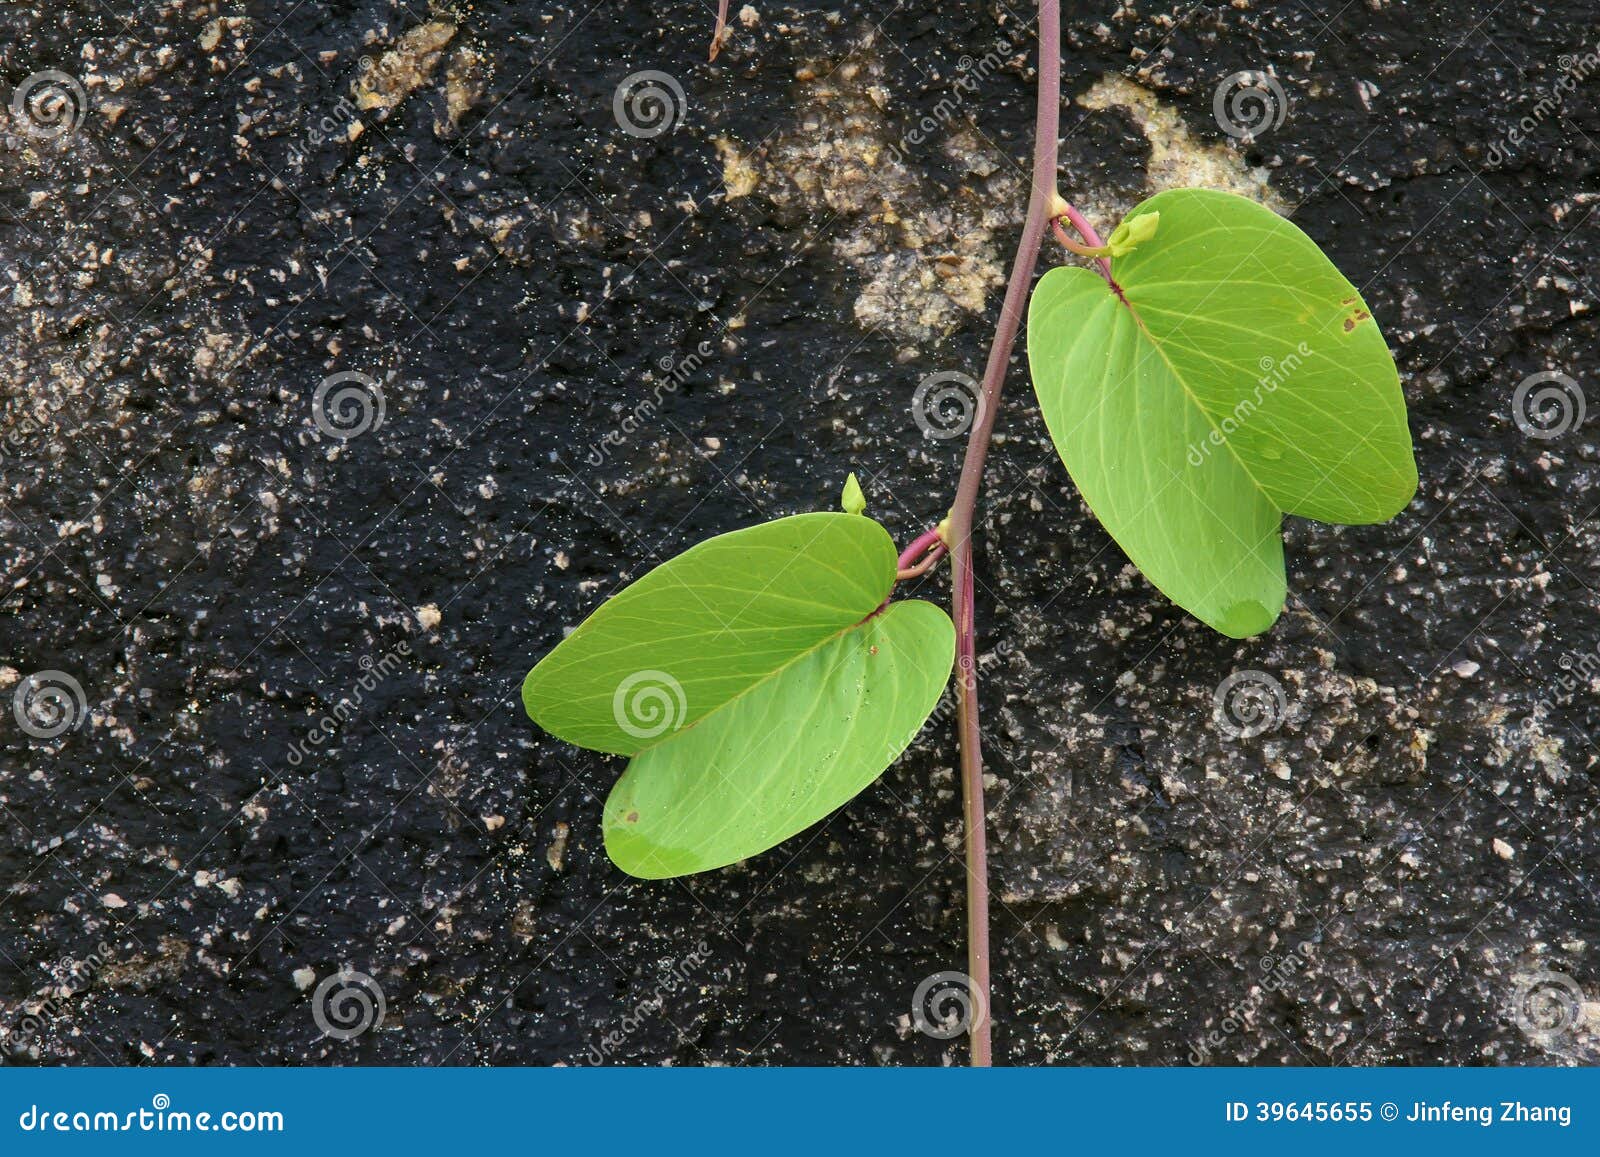 two leaves